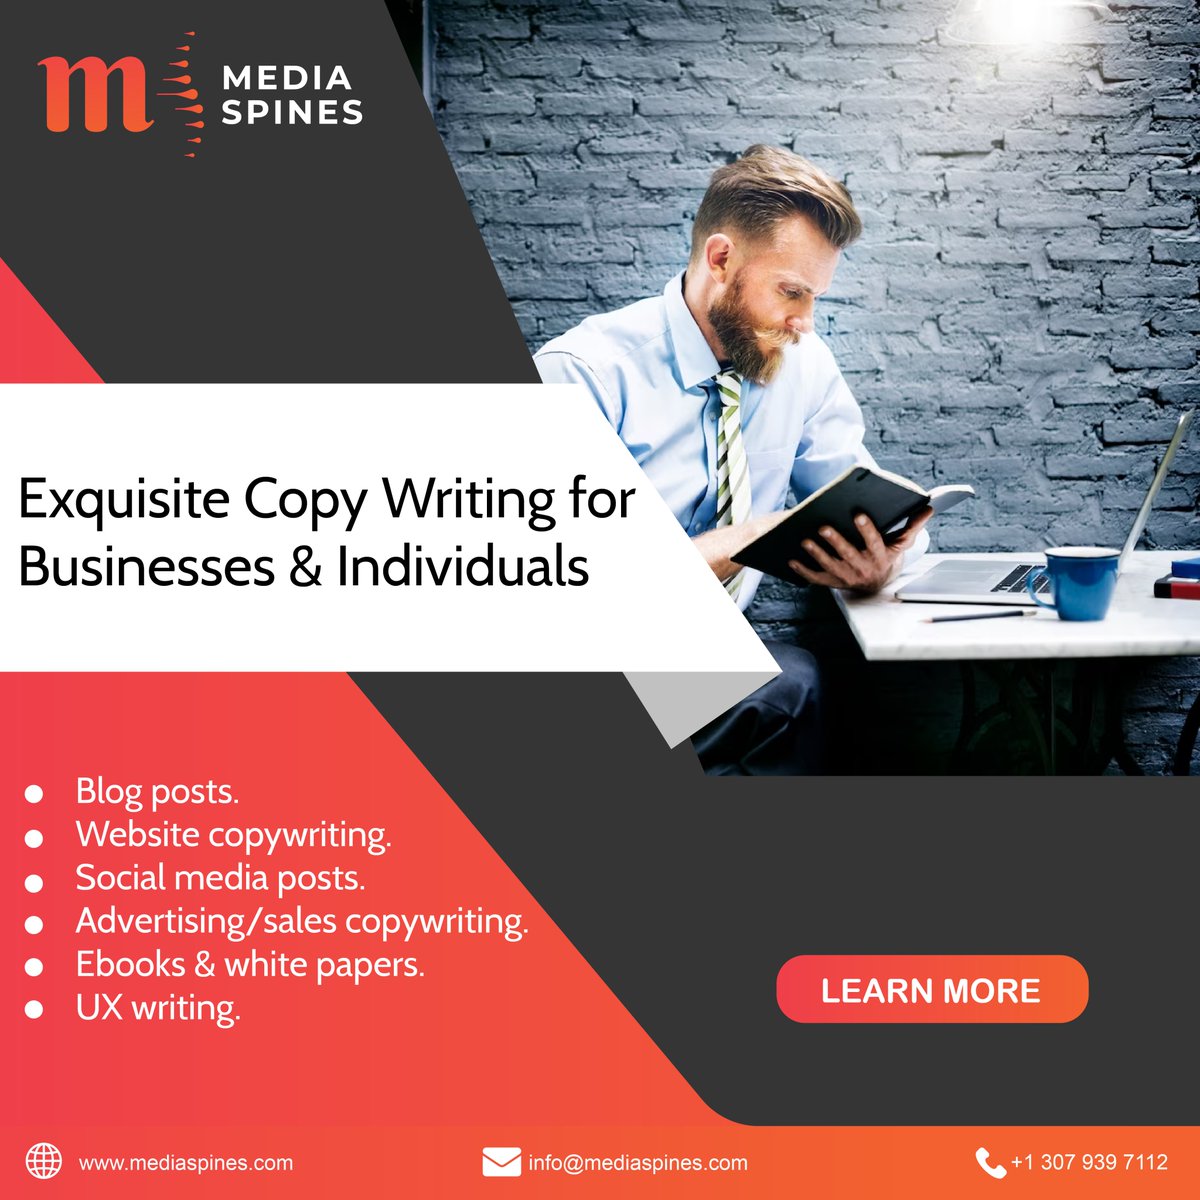 We have a team of competent writers with great writing skills. Get your writing work done with Media Spines.

#blogposting #websitecopywriter #socialmediaposts #salescopywriting #ebookwriter #uxwriting #usaseoservices #digitalmarketingexperts #advertisingcopywriter #writers